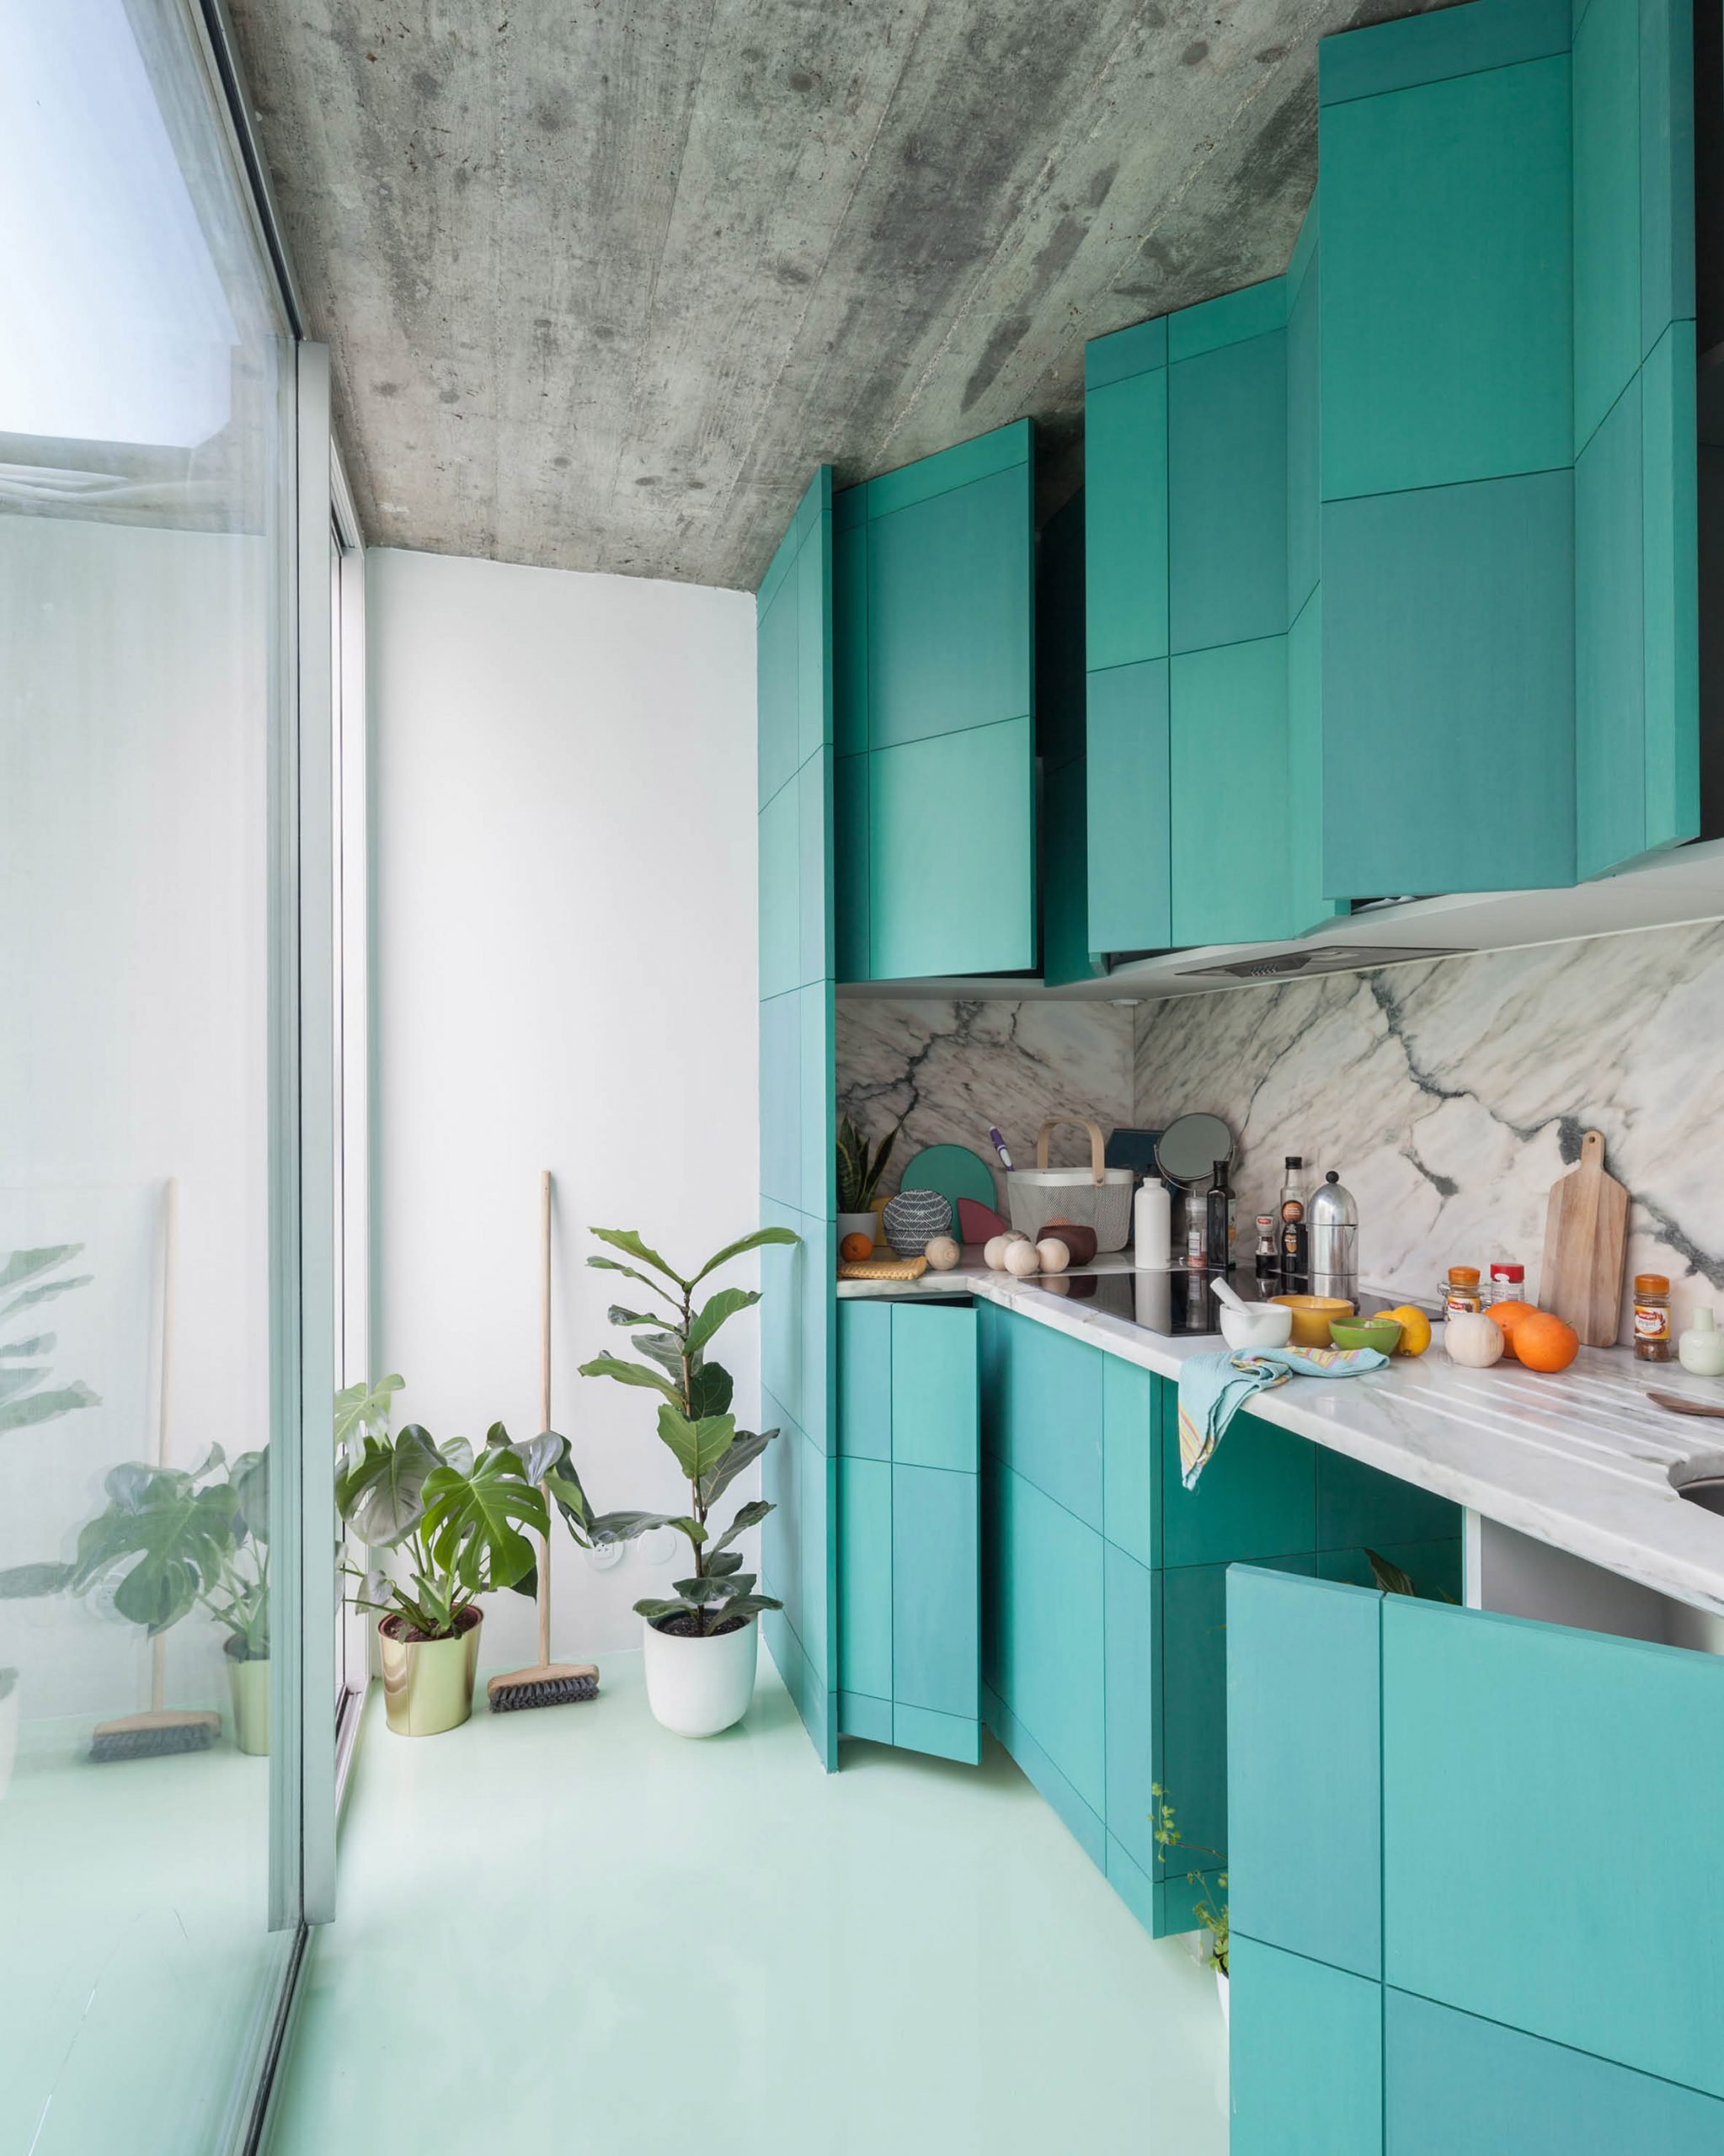 Apartment with a mint-green floor